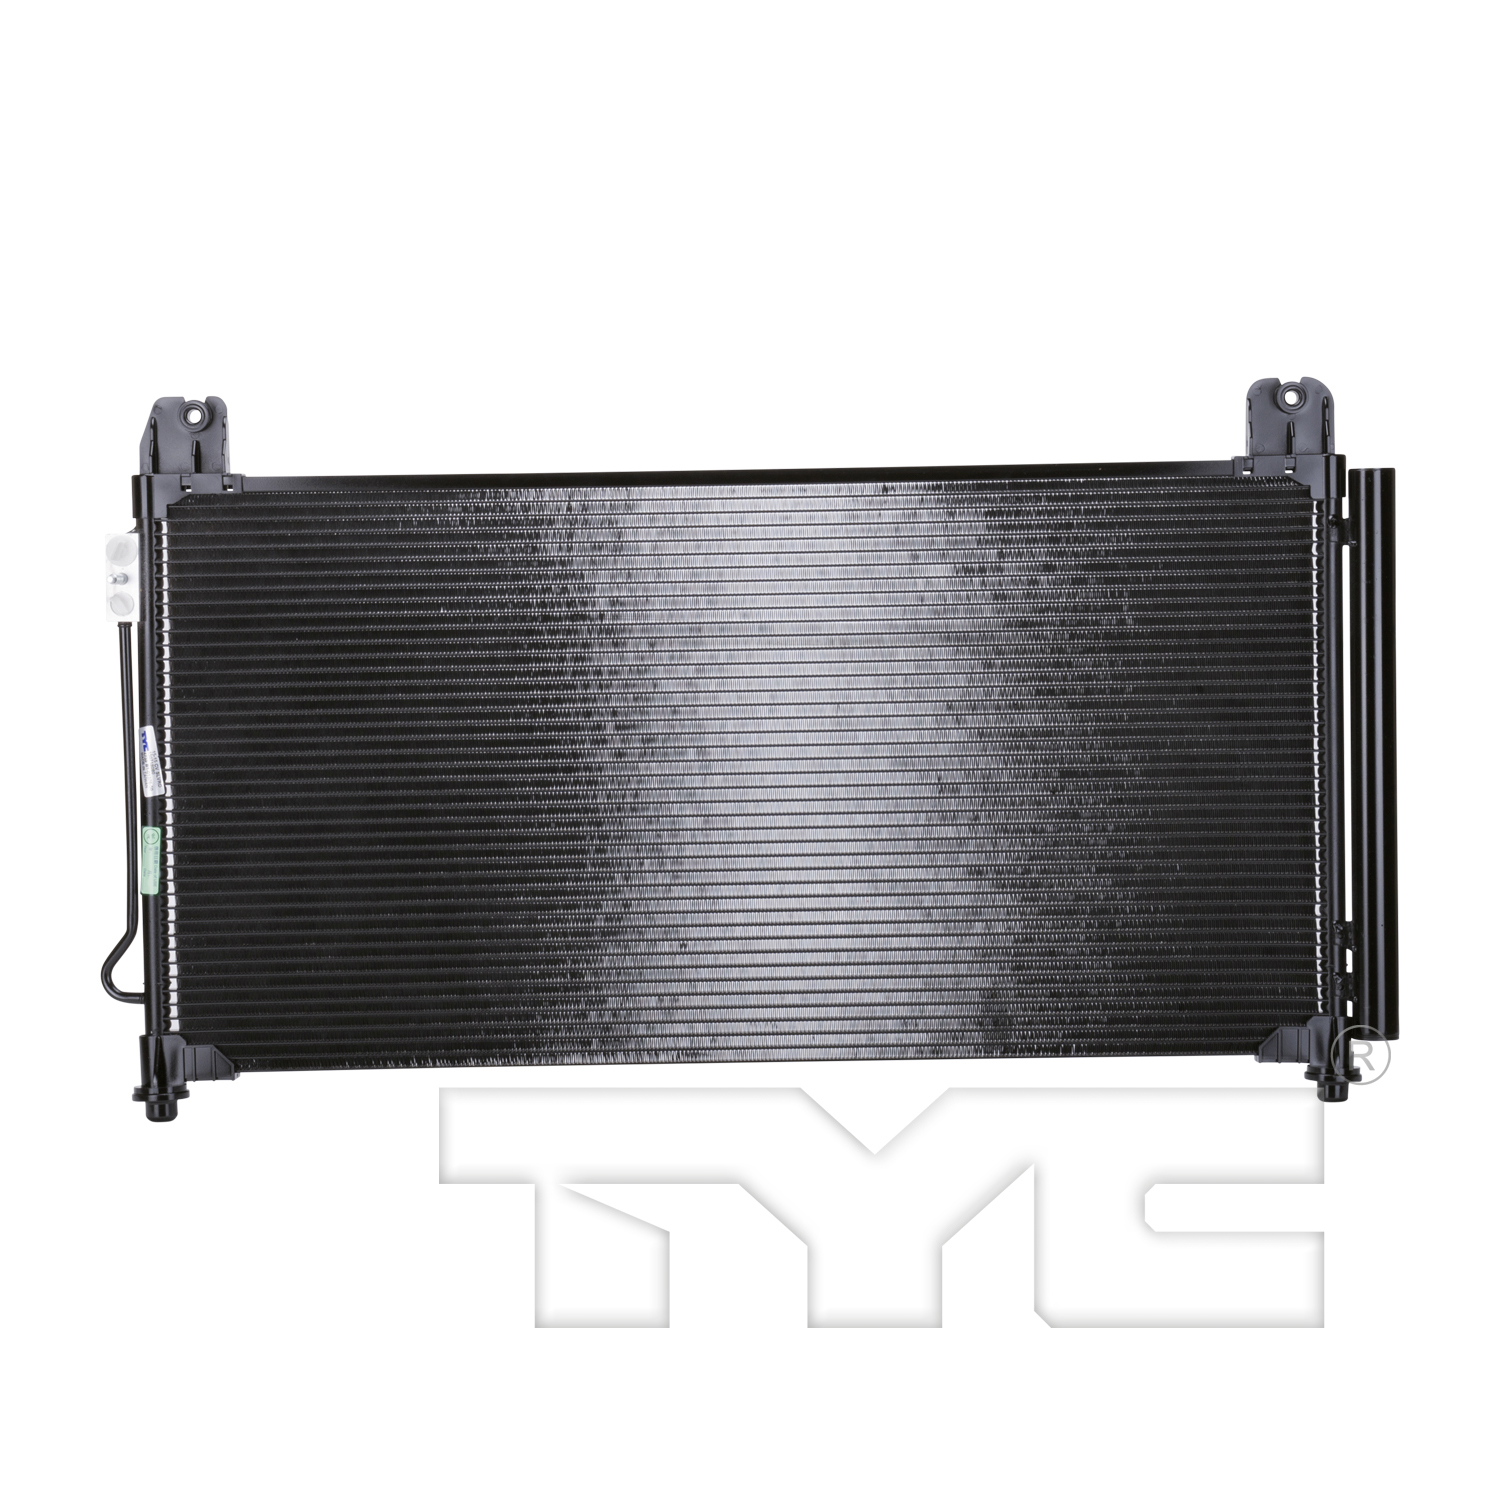 Aftermarket AC CONDENSERS for CHEVROLET - SILVERADO 2500 HD, SILVERADO 2500 HD,15-19,Air conditioning condenser